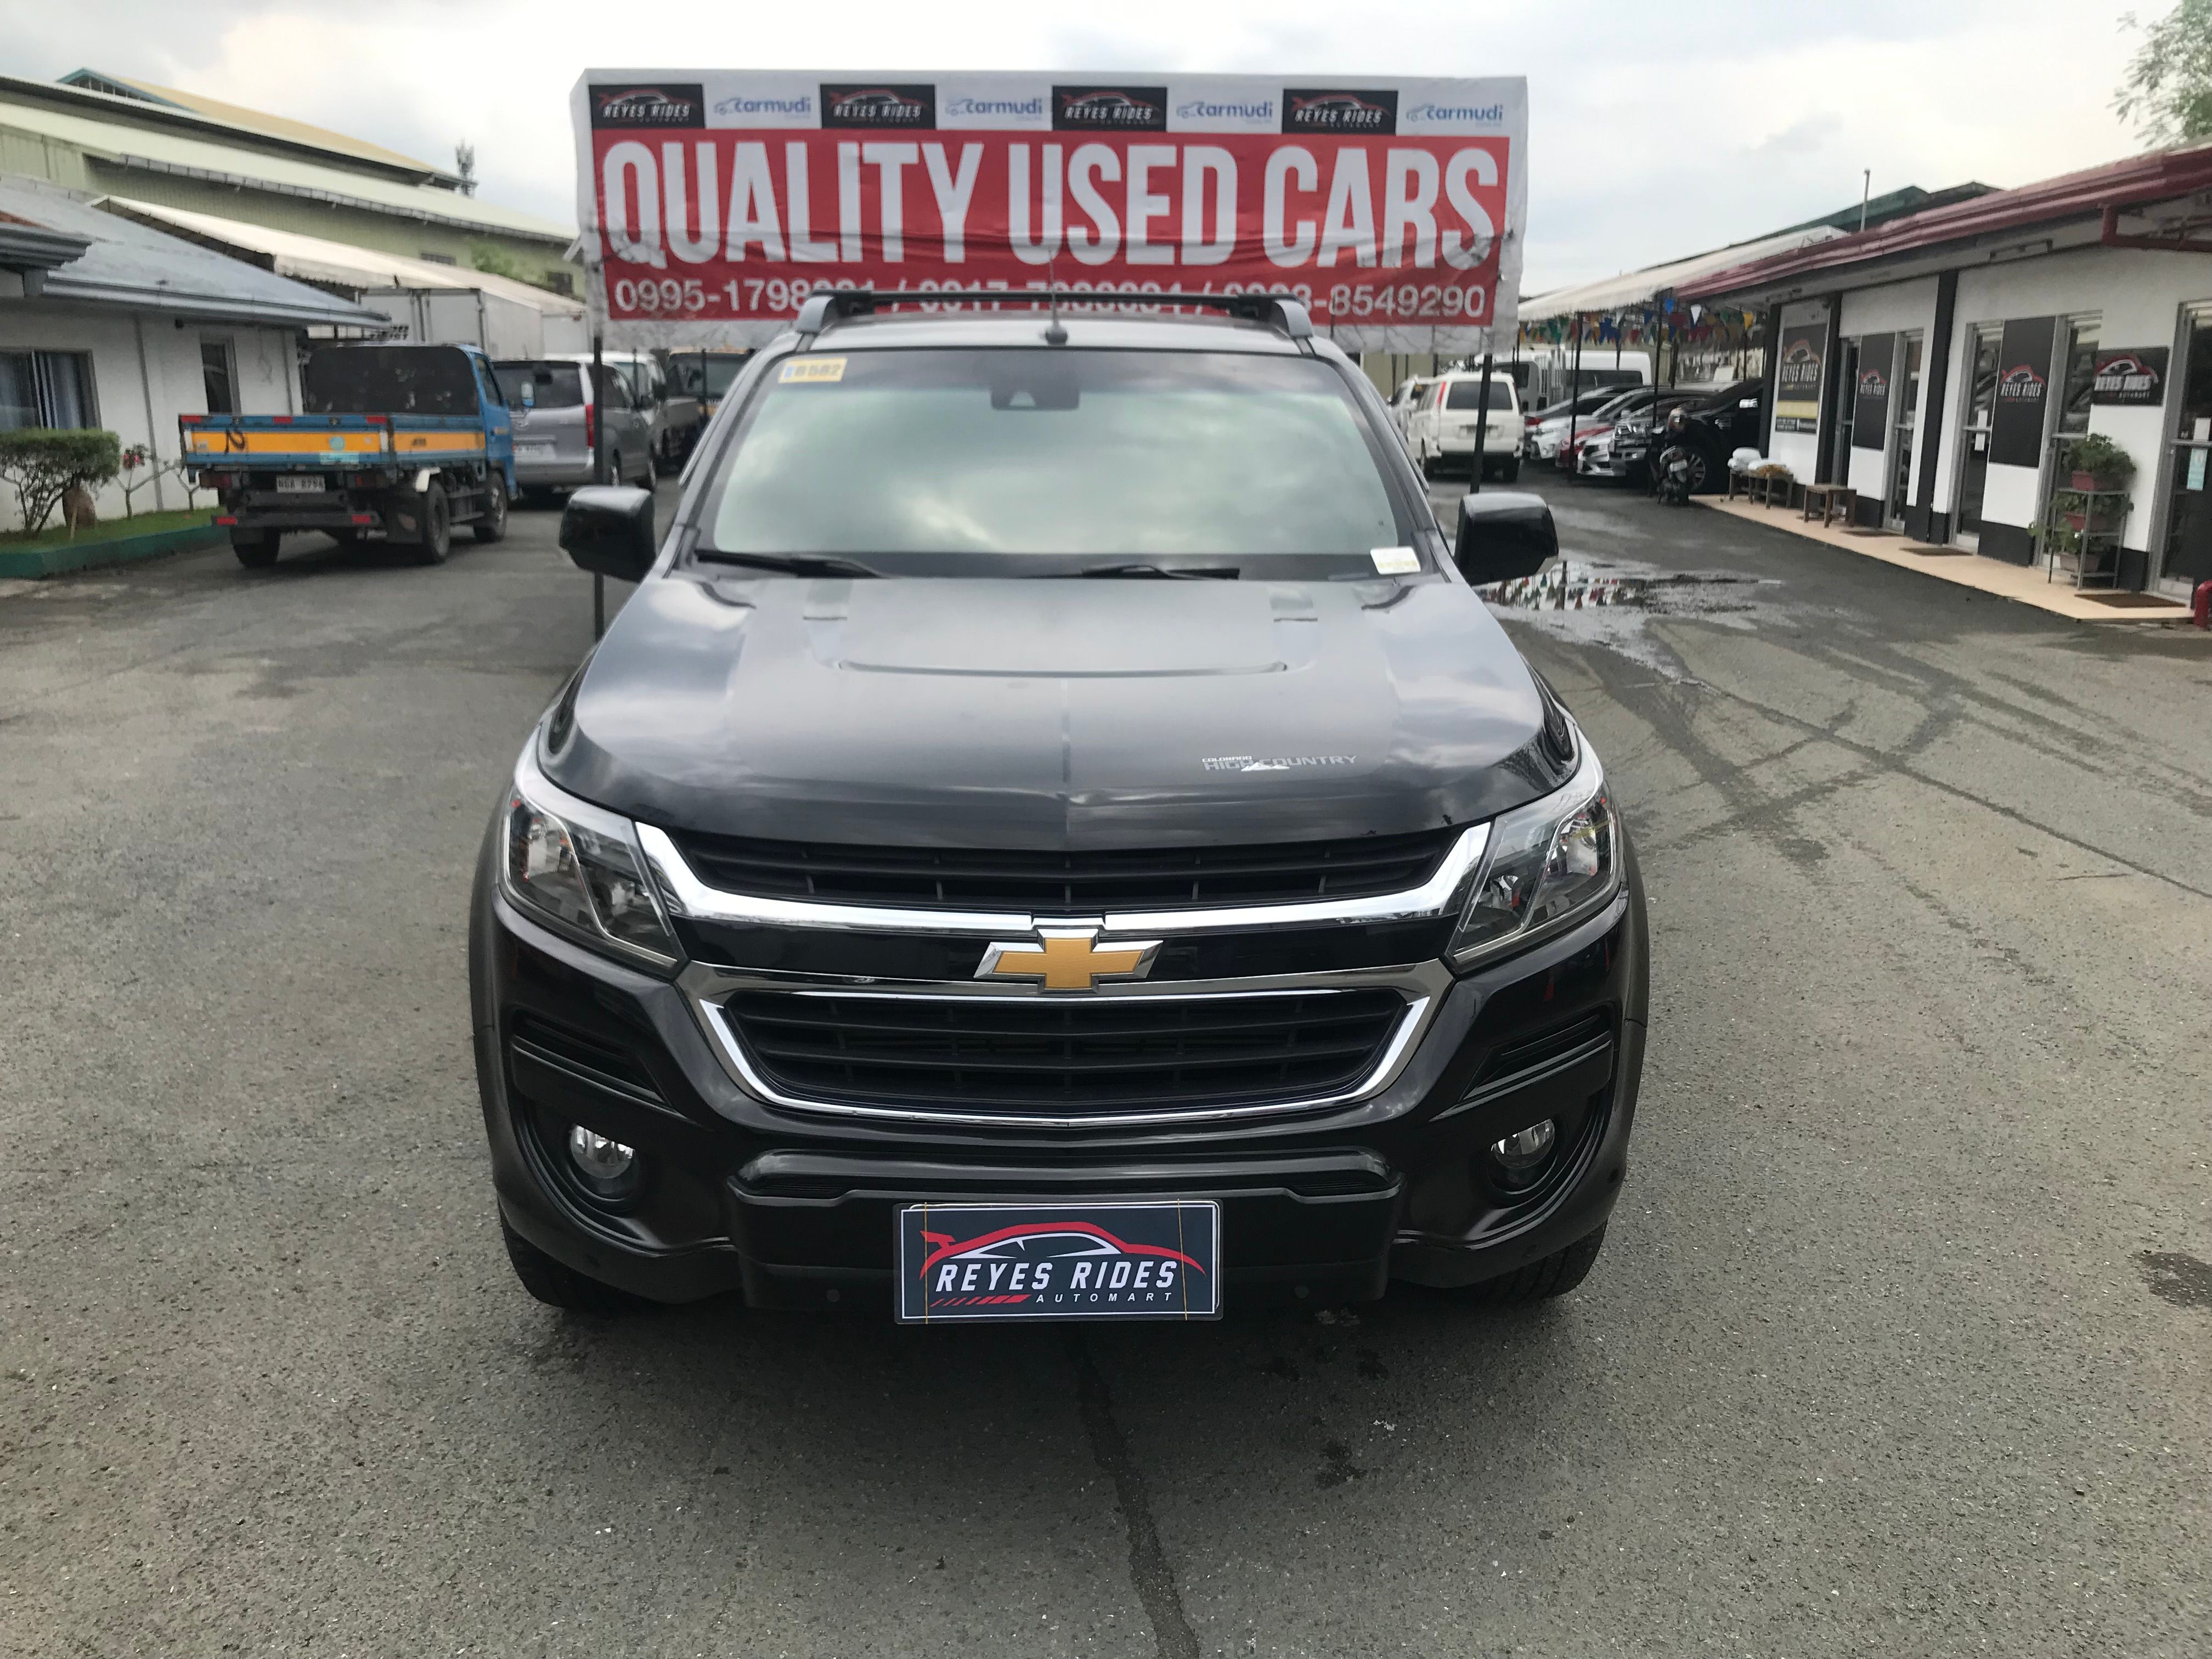 Second hand 2019 Chevrolet Colorado 2.8L 4x4 AT High Country Storm